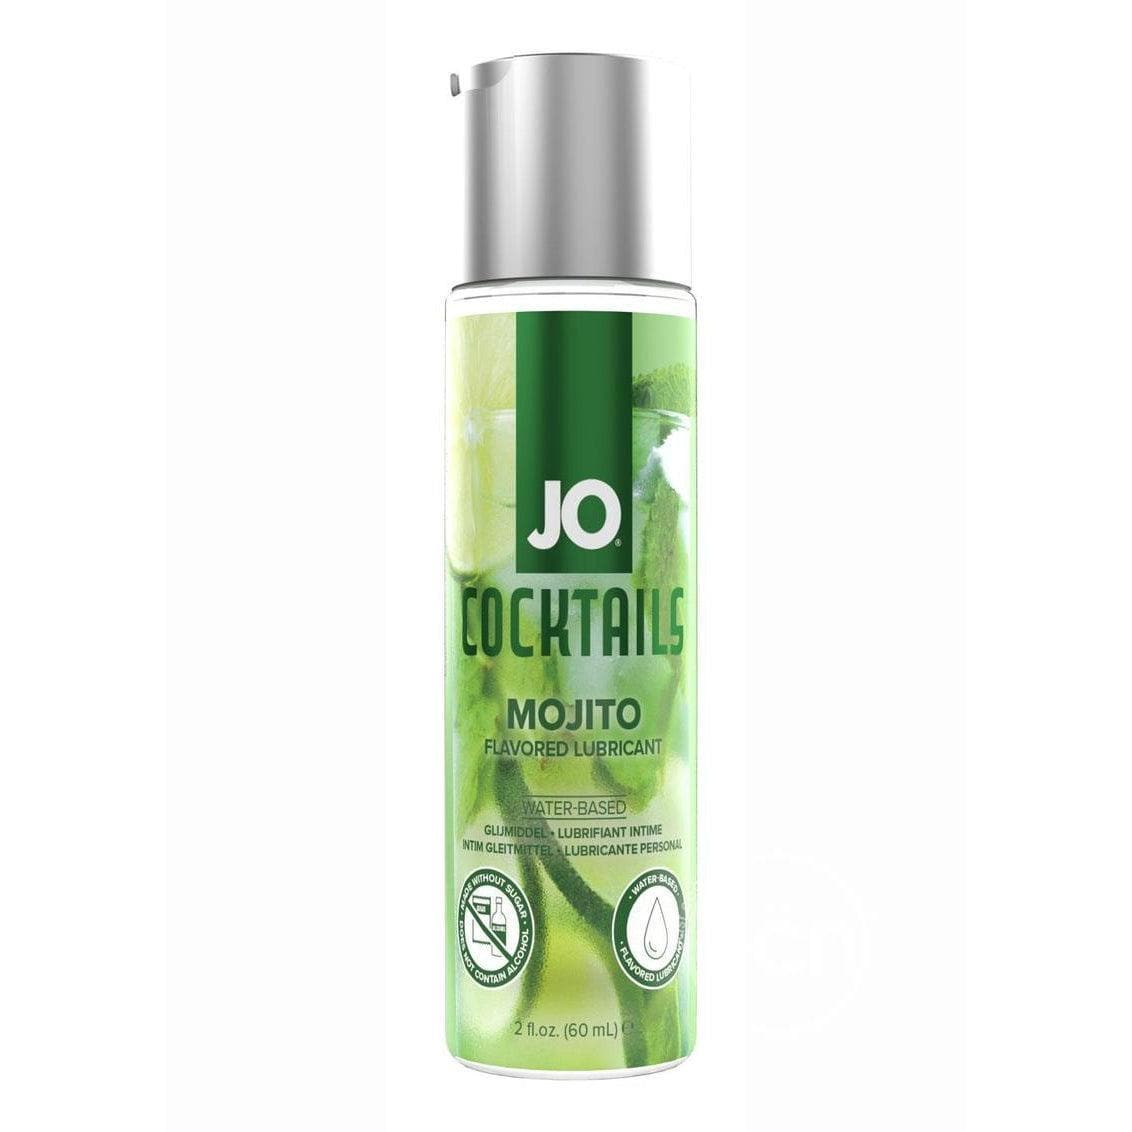 JO Cocktails Water Based Mojito Flavored Lubricant 2 oz - Romantic Blessings